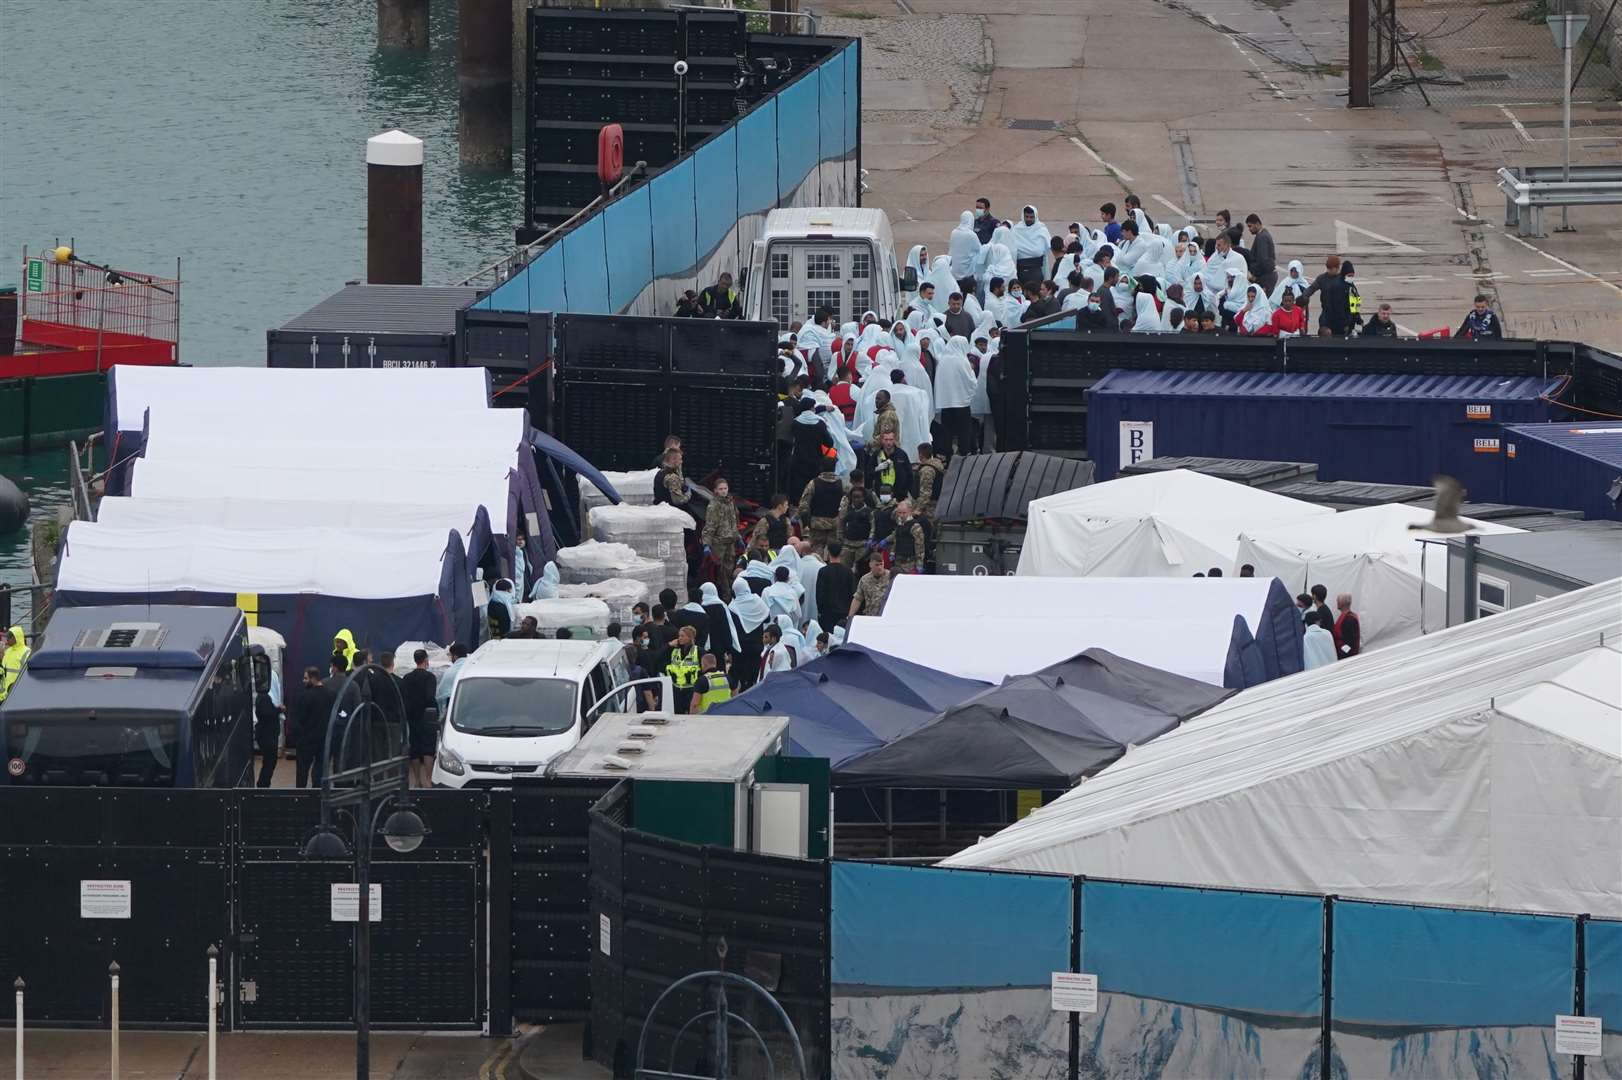 A group of people thought to be migrants at the migrant processing centre in Dover Picture: PA